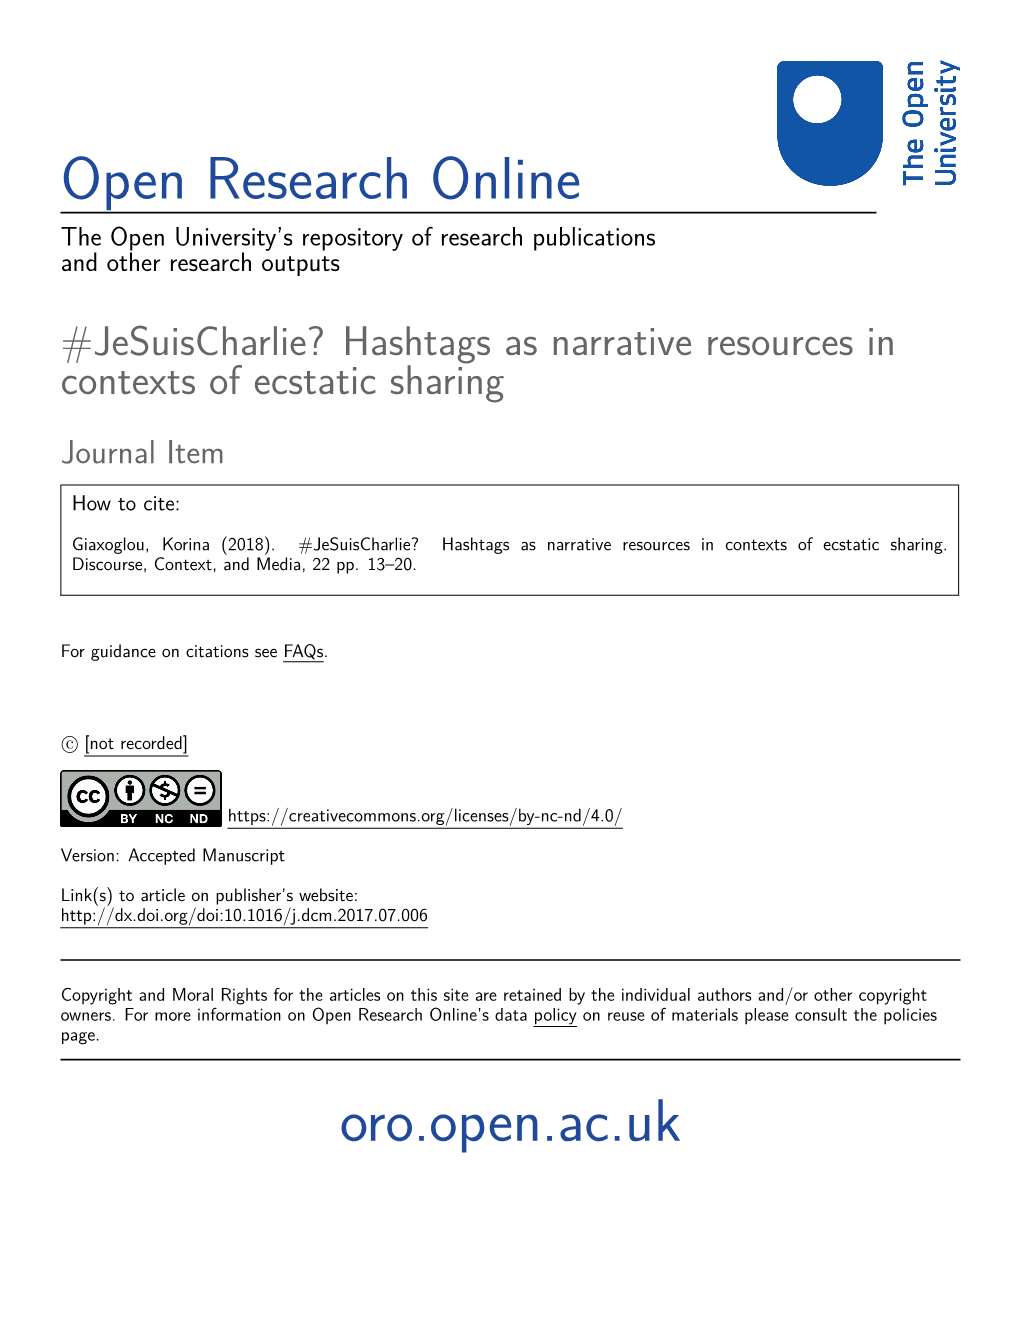 Jesuischarlie? Hashtags As Narrative Resources in Contexts of Ecstatic Sharing